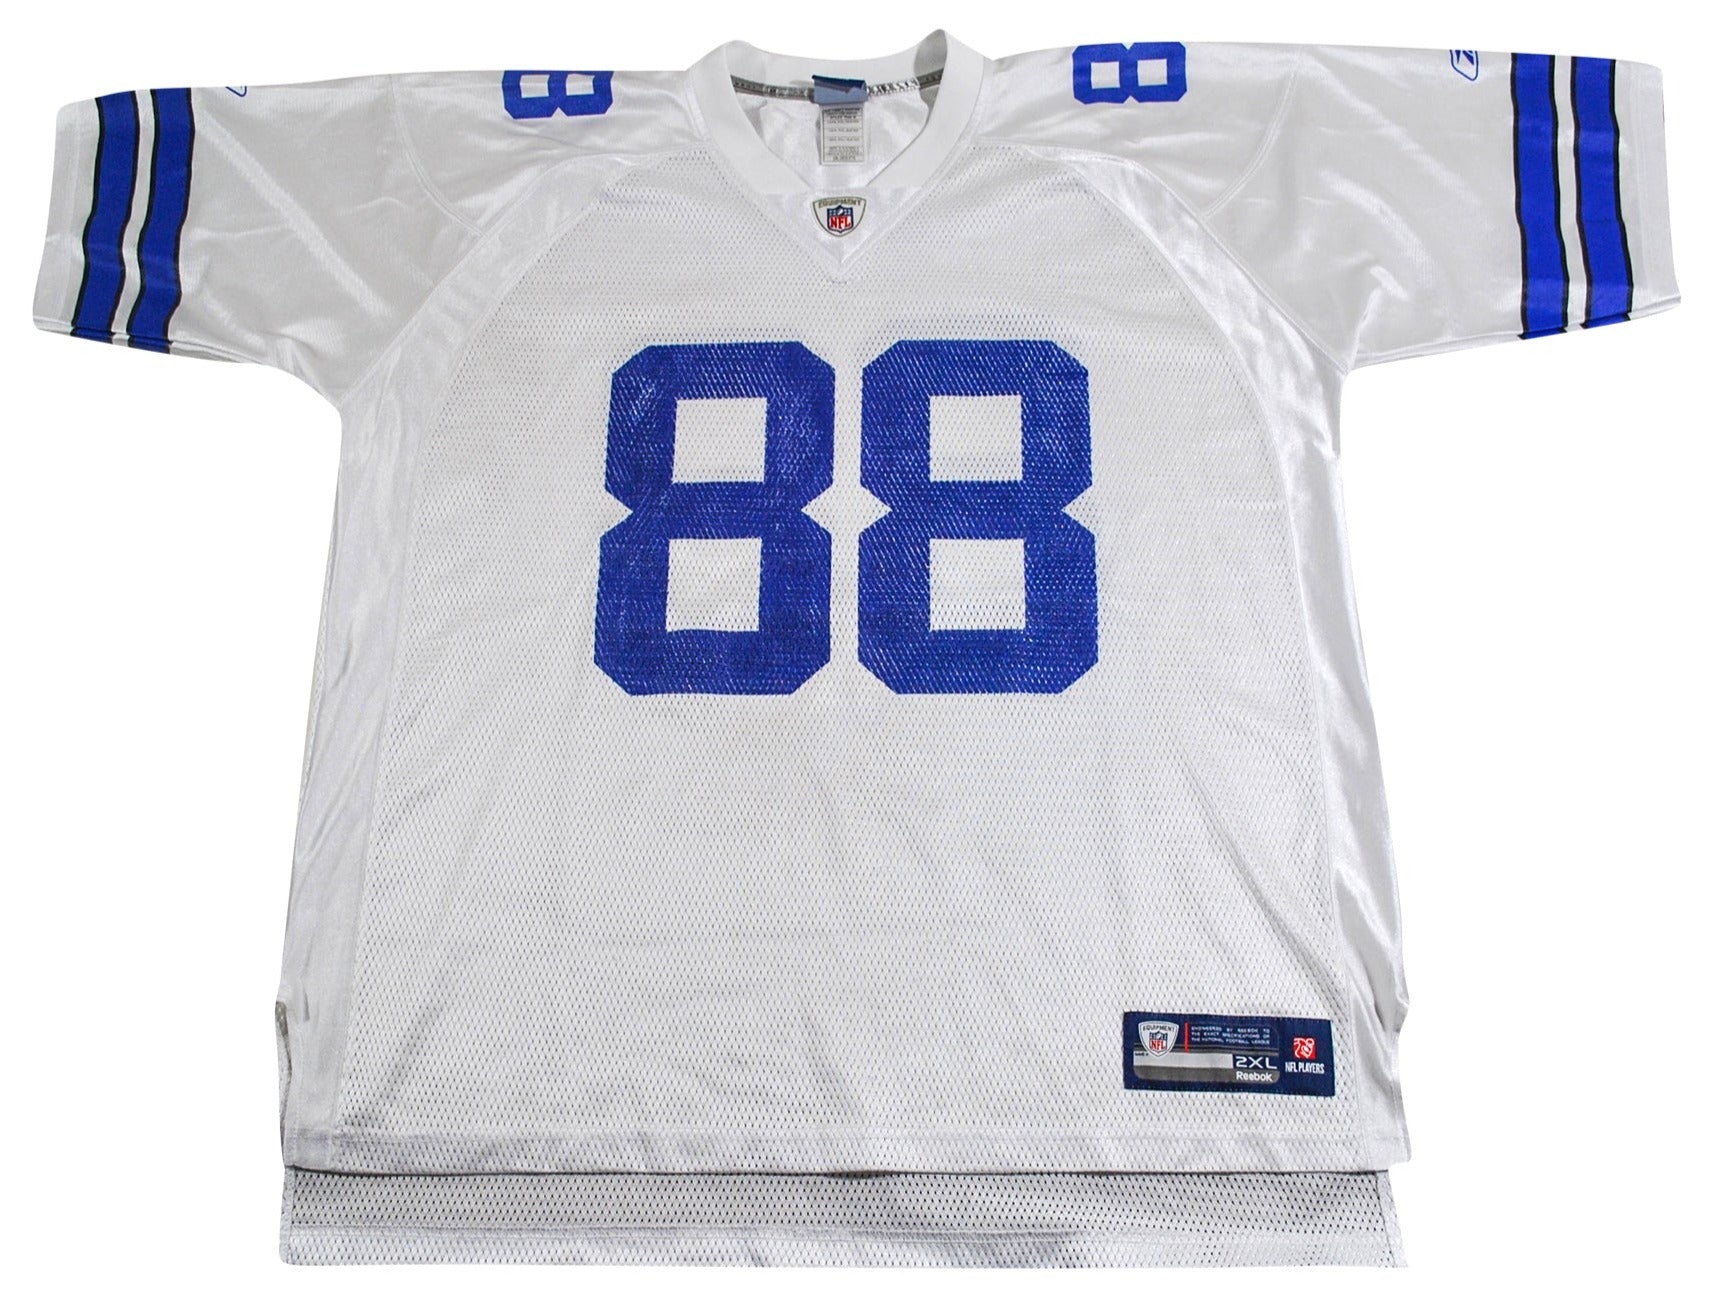 NFL Dallas Cowboys Dez Bryant Youth Jersey 